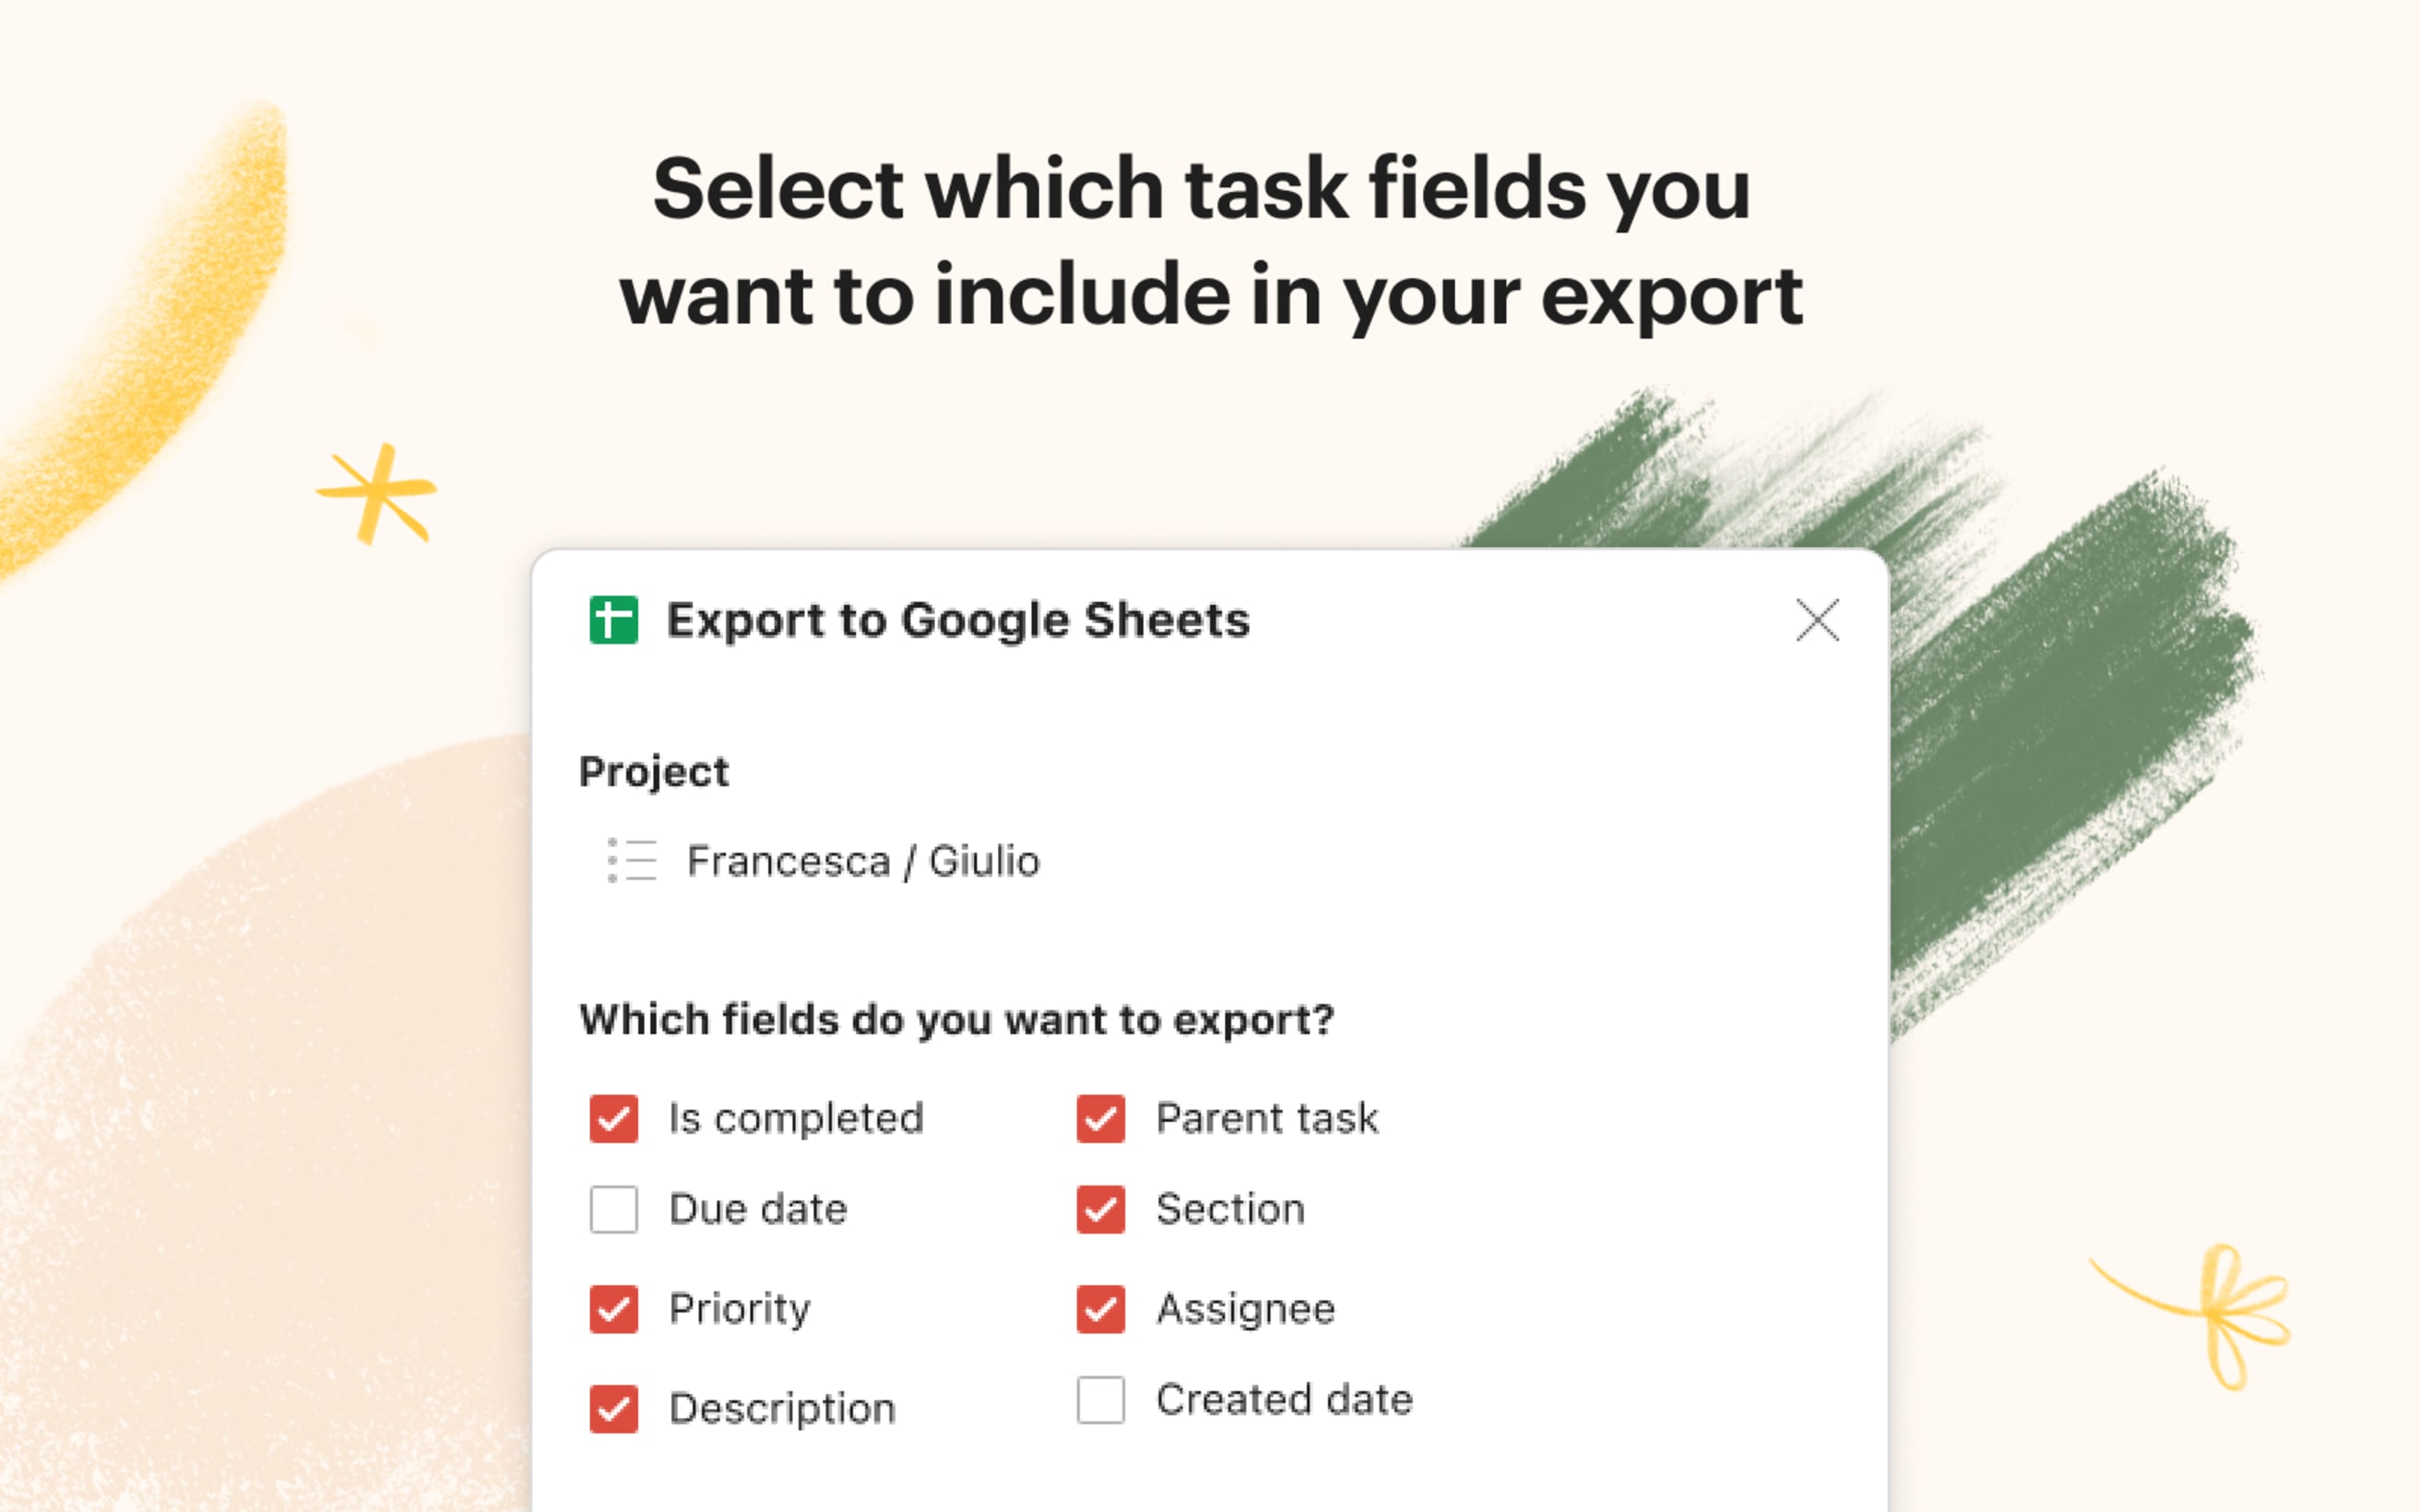 Export to Google Sheets - select fields